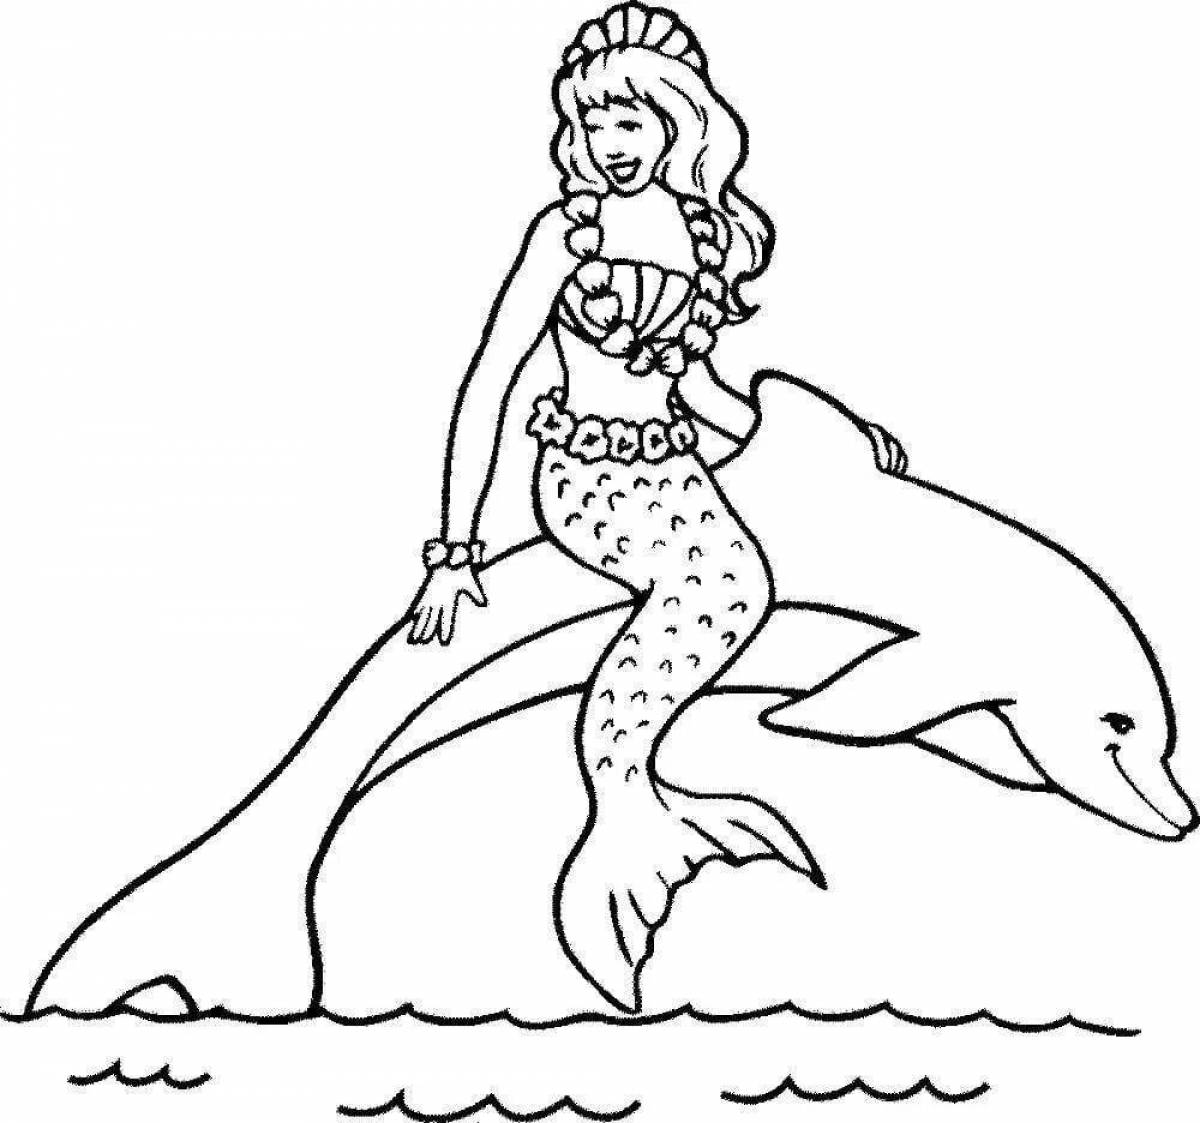 Great coloring mermaid and dolphin